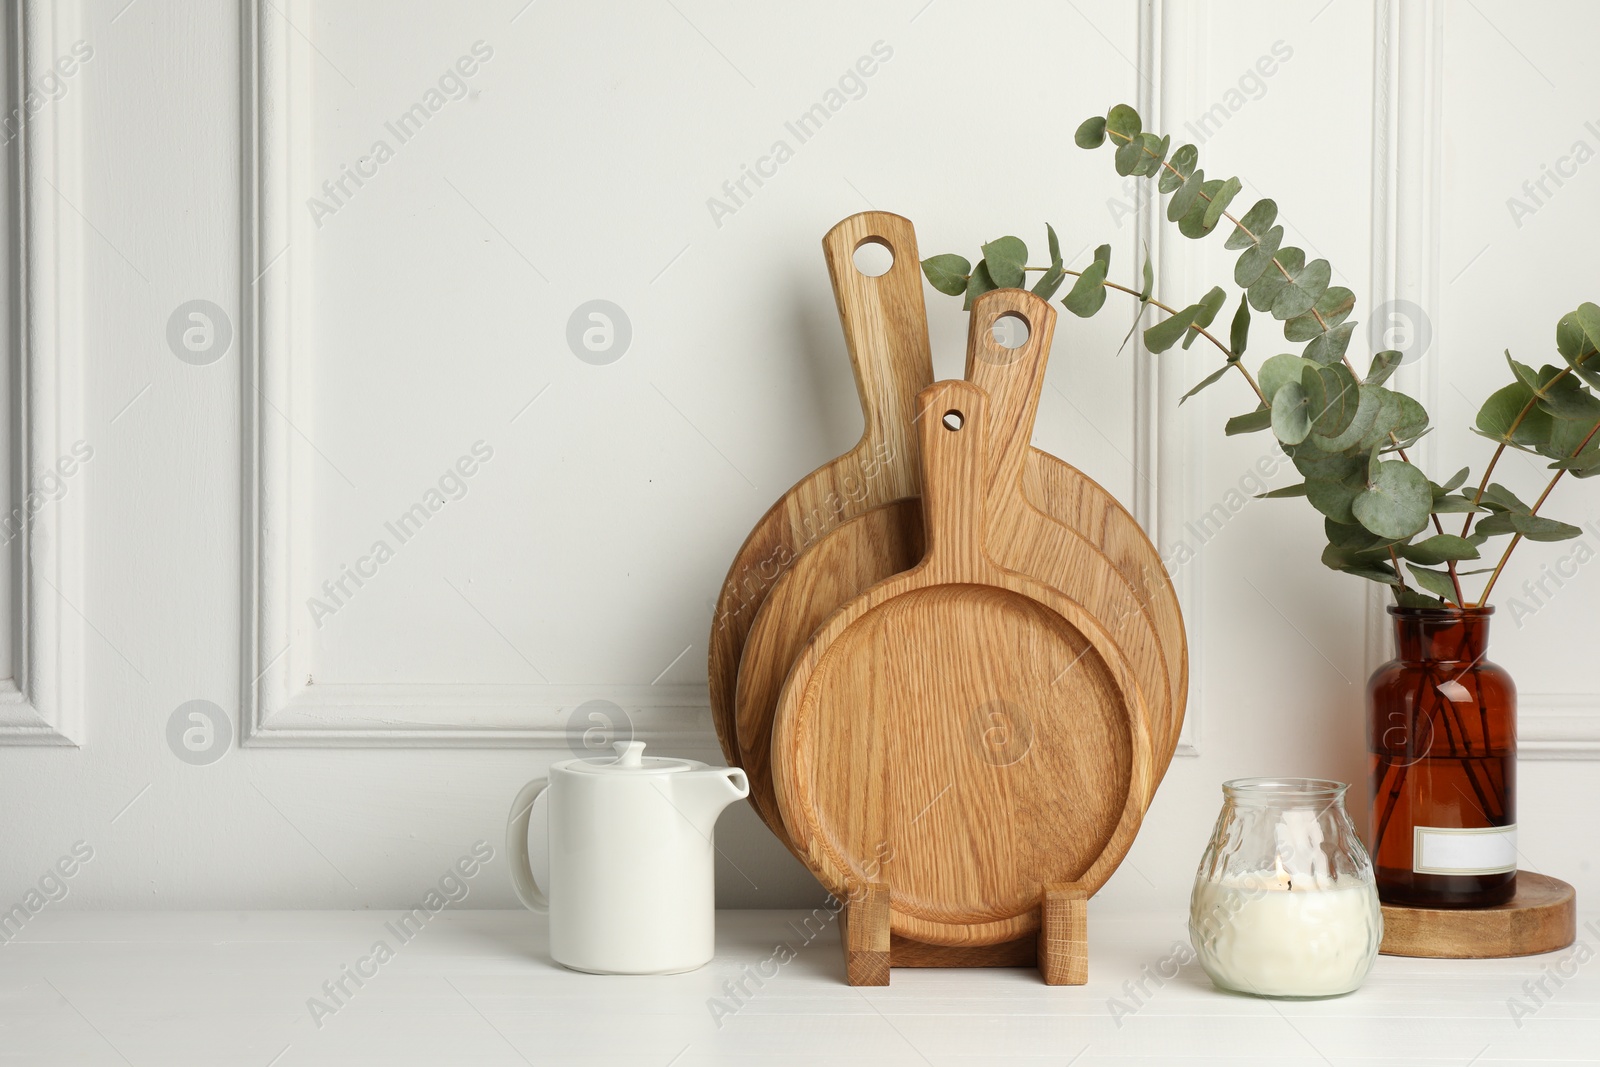 Photo of Wooden cutting boards, teapot, candle and vase with eucalyptus branches on white table, space for text